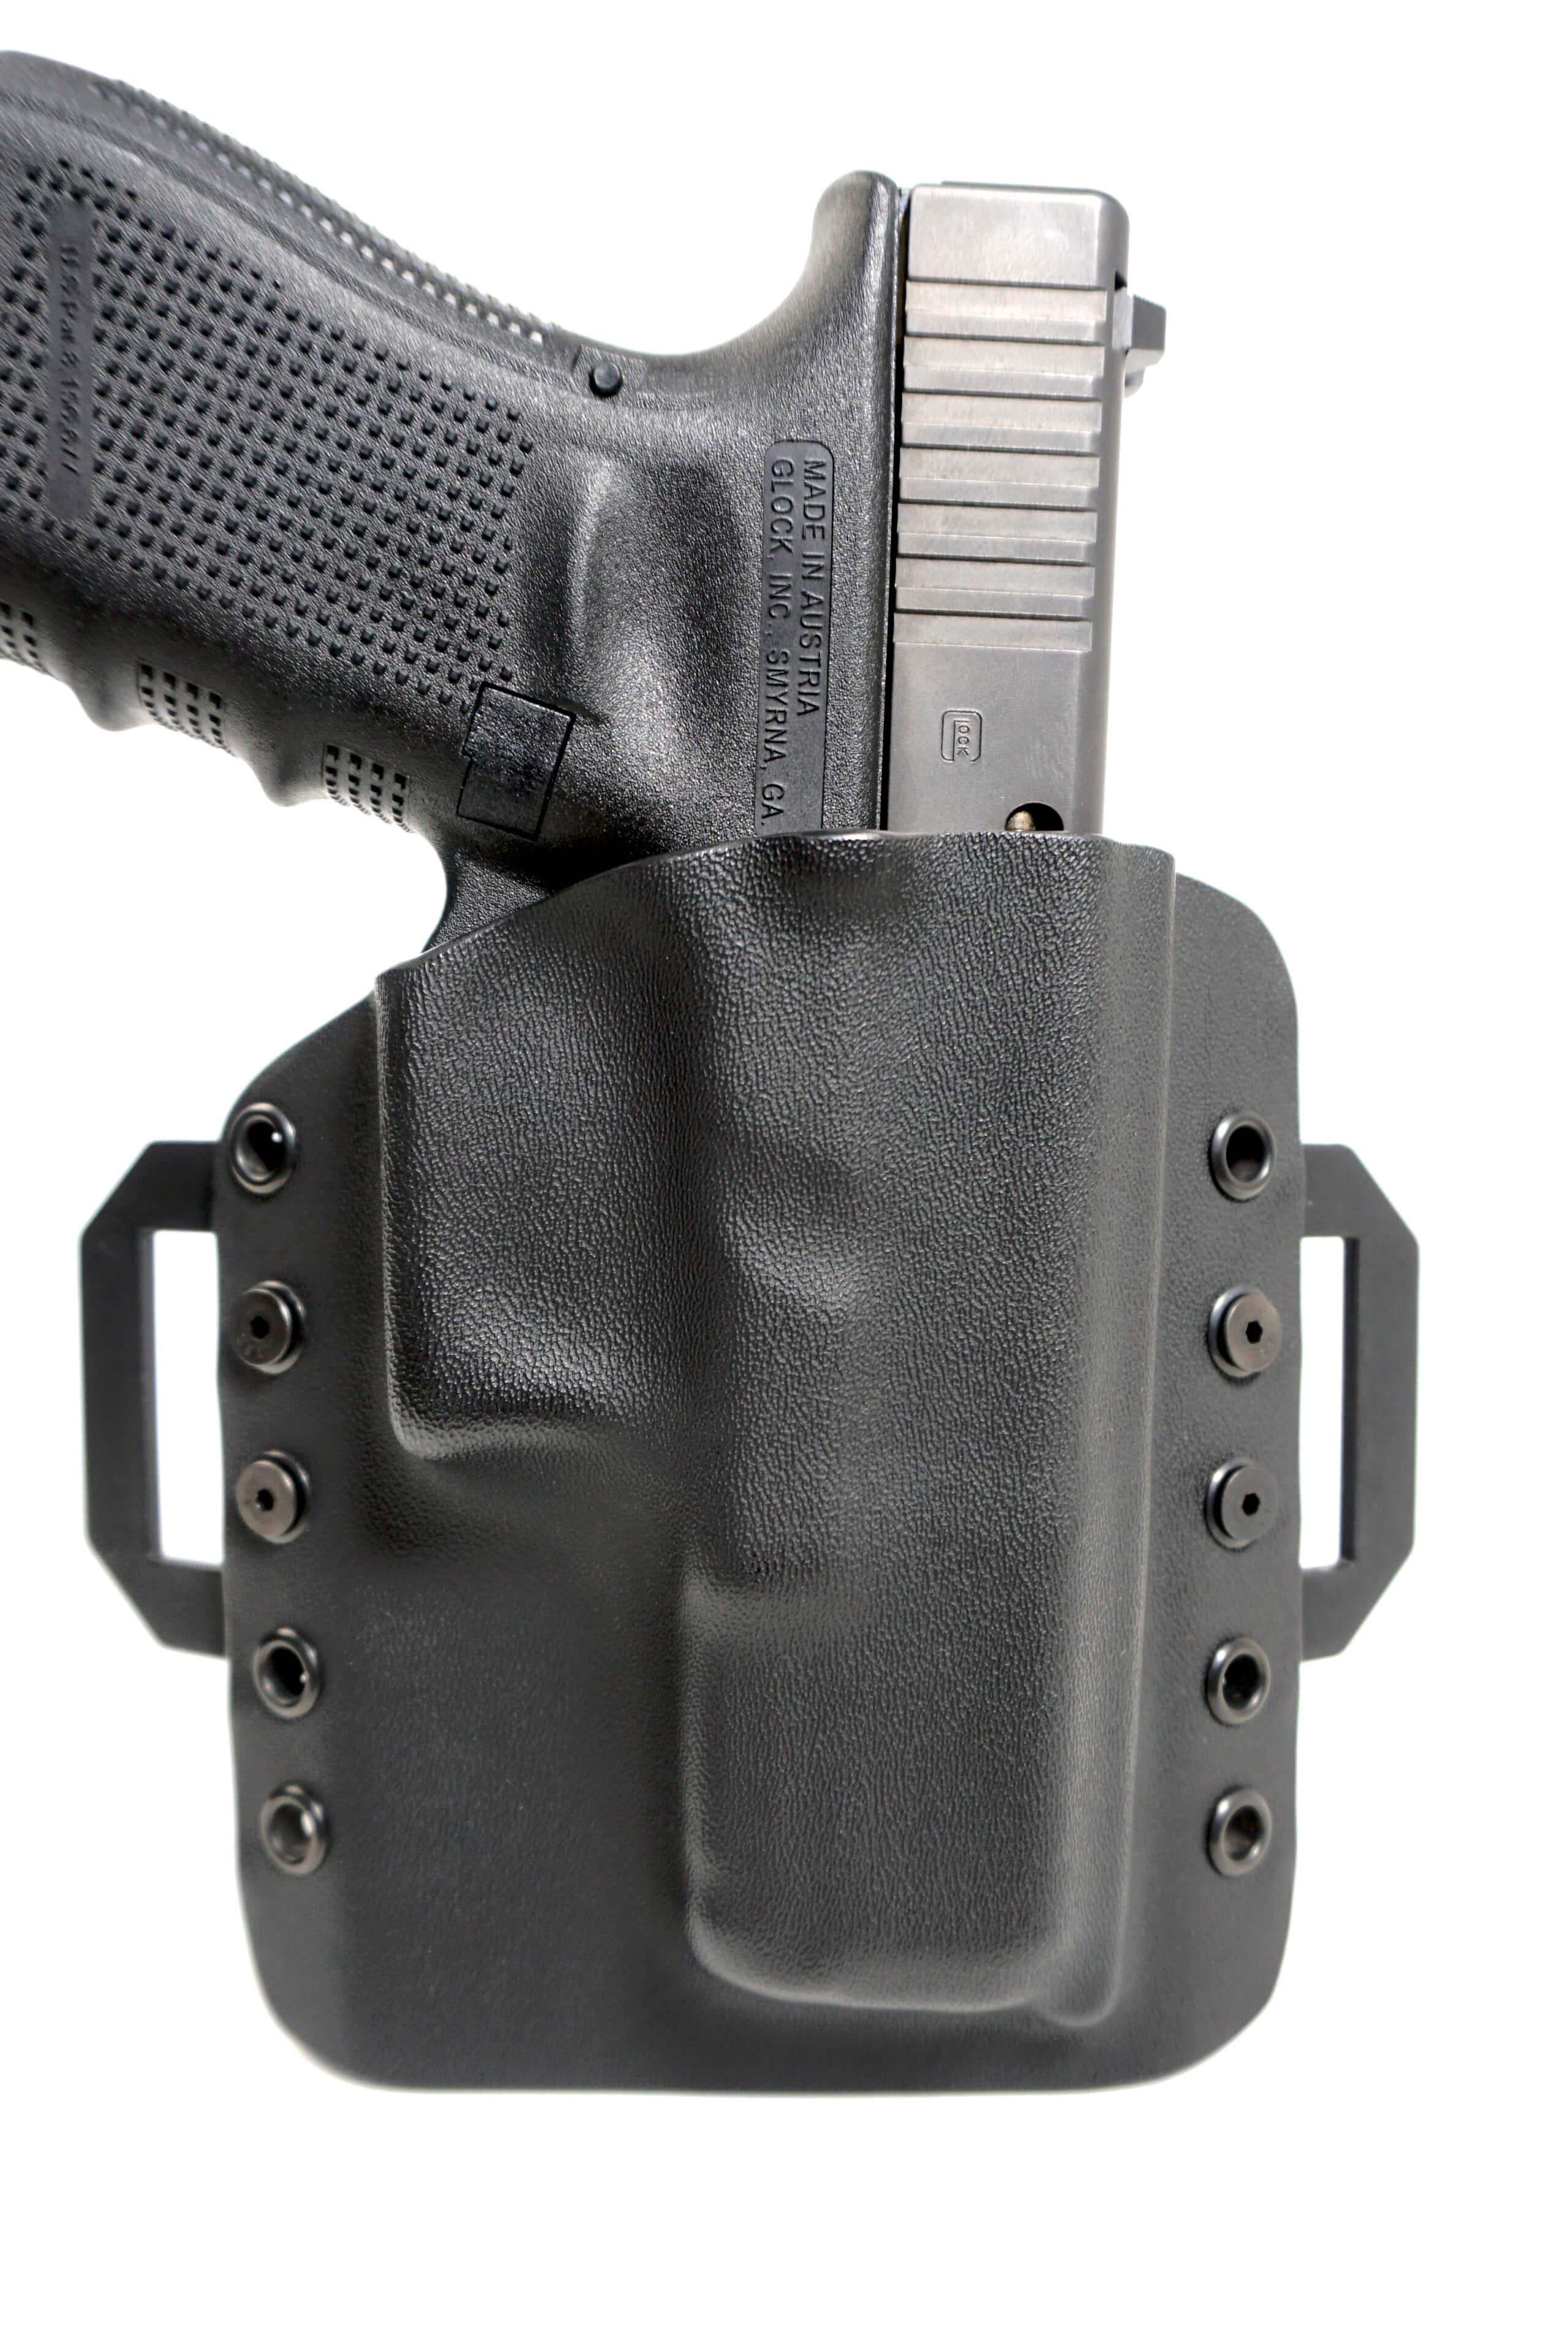 Details about  / Green /& Black USA OWB Kydex Holster For Taurus